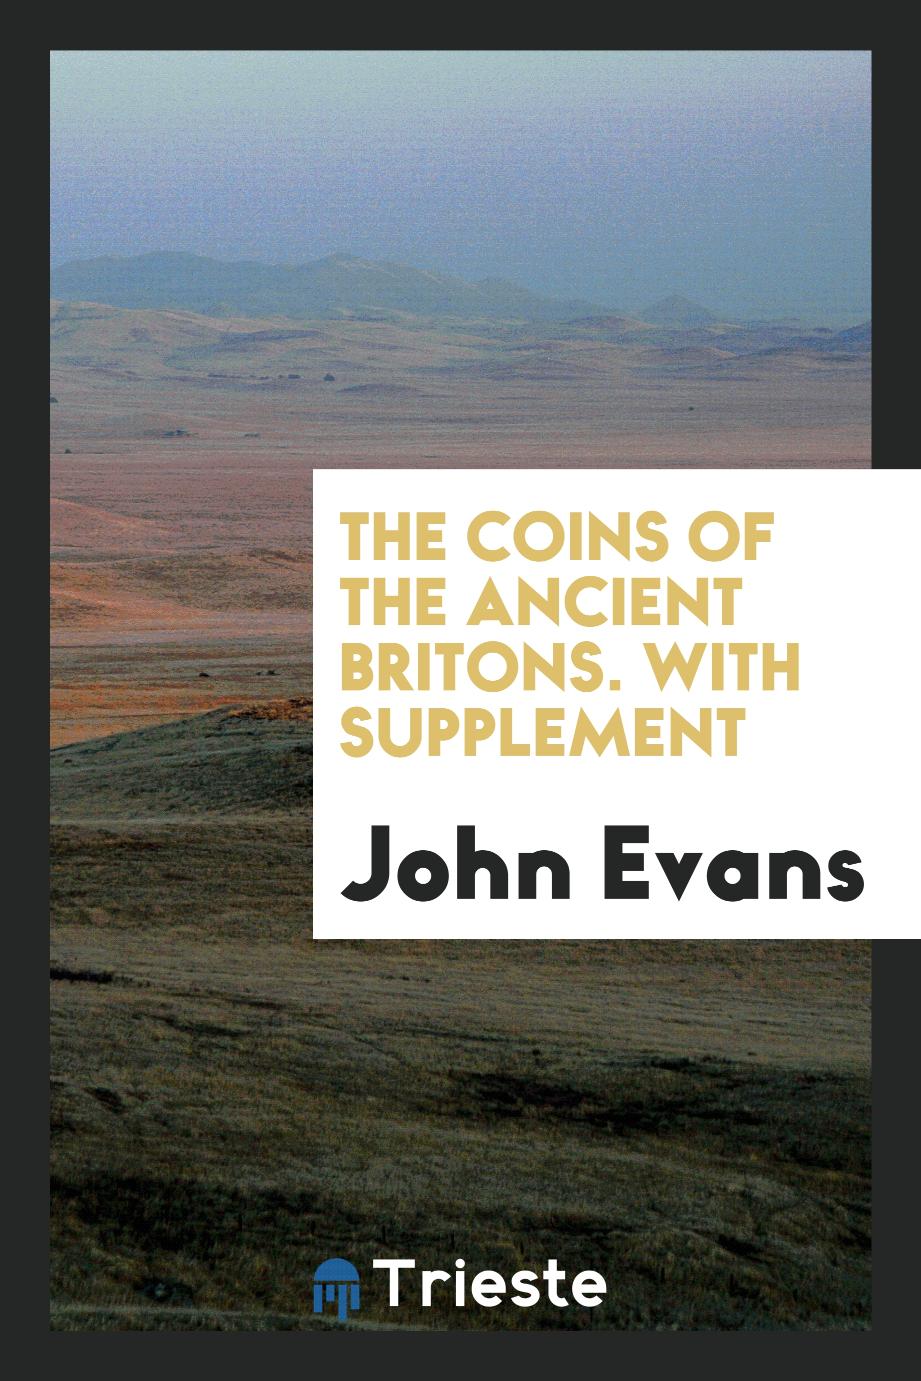 The Coins of the Ancient Britons. With Supplement